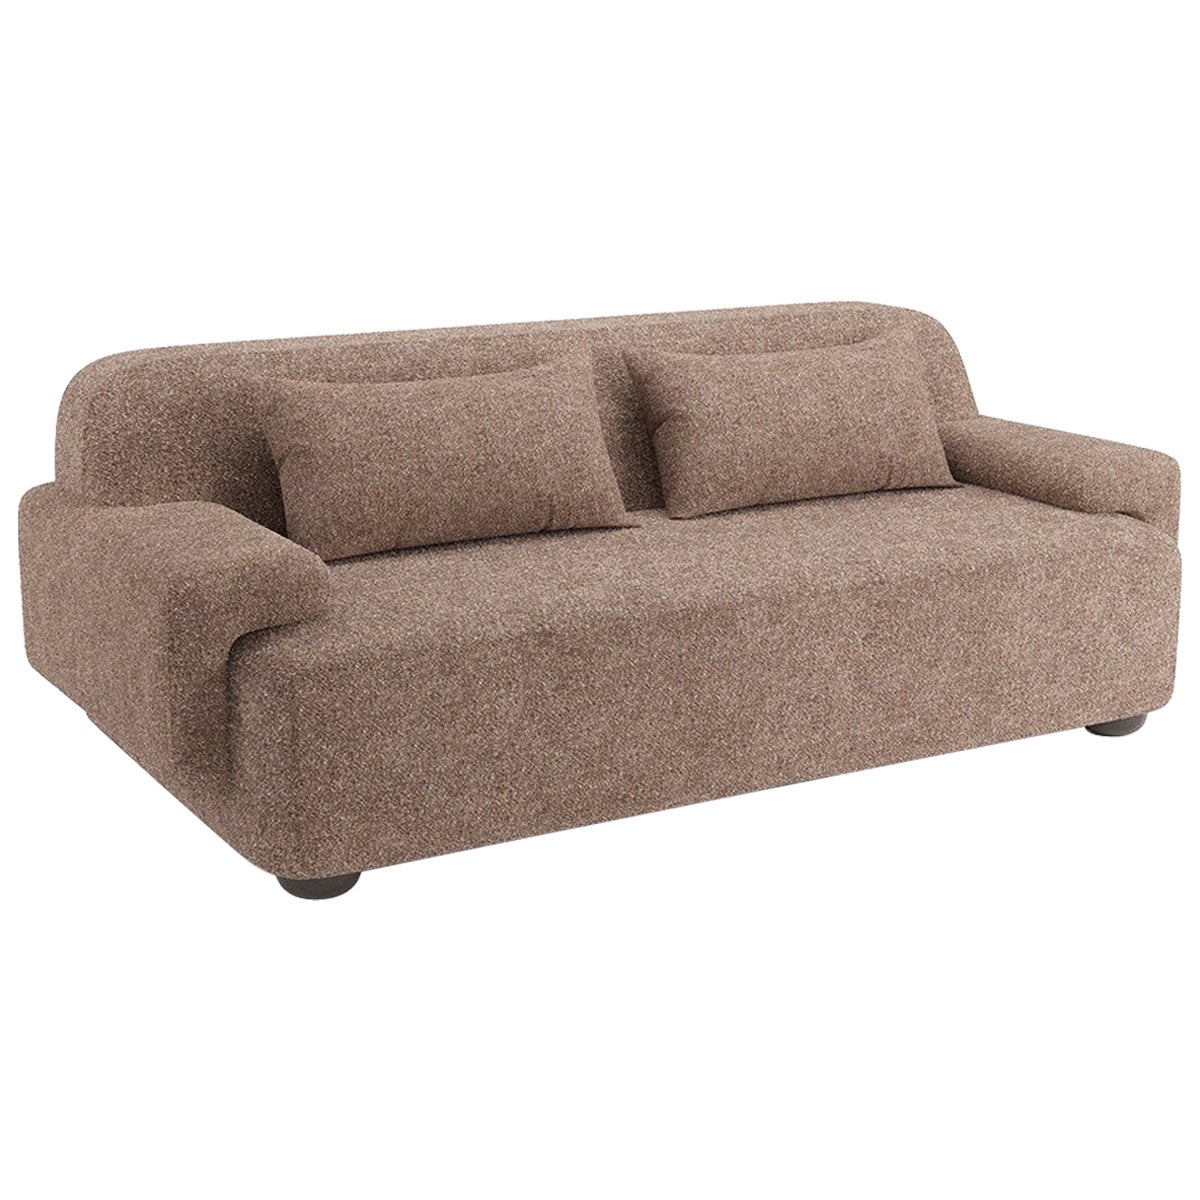 Popus Editions Lena 4 Seater Sofa in Mole Taupe Antwerp Linen Upholstery For Sale